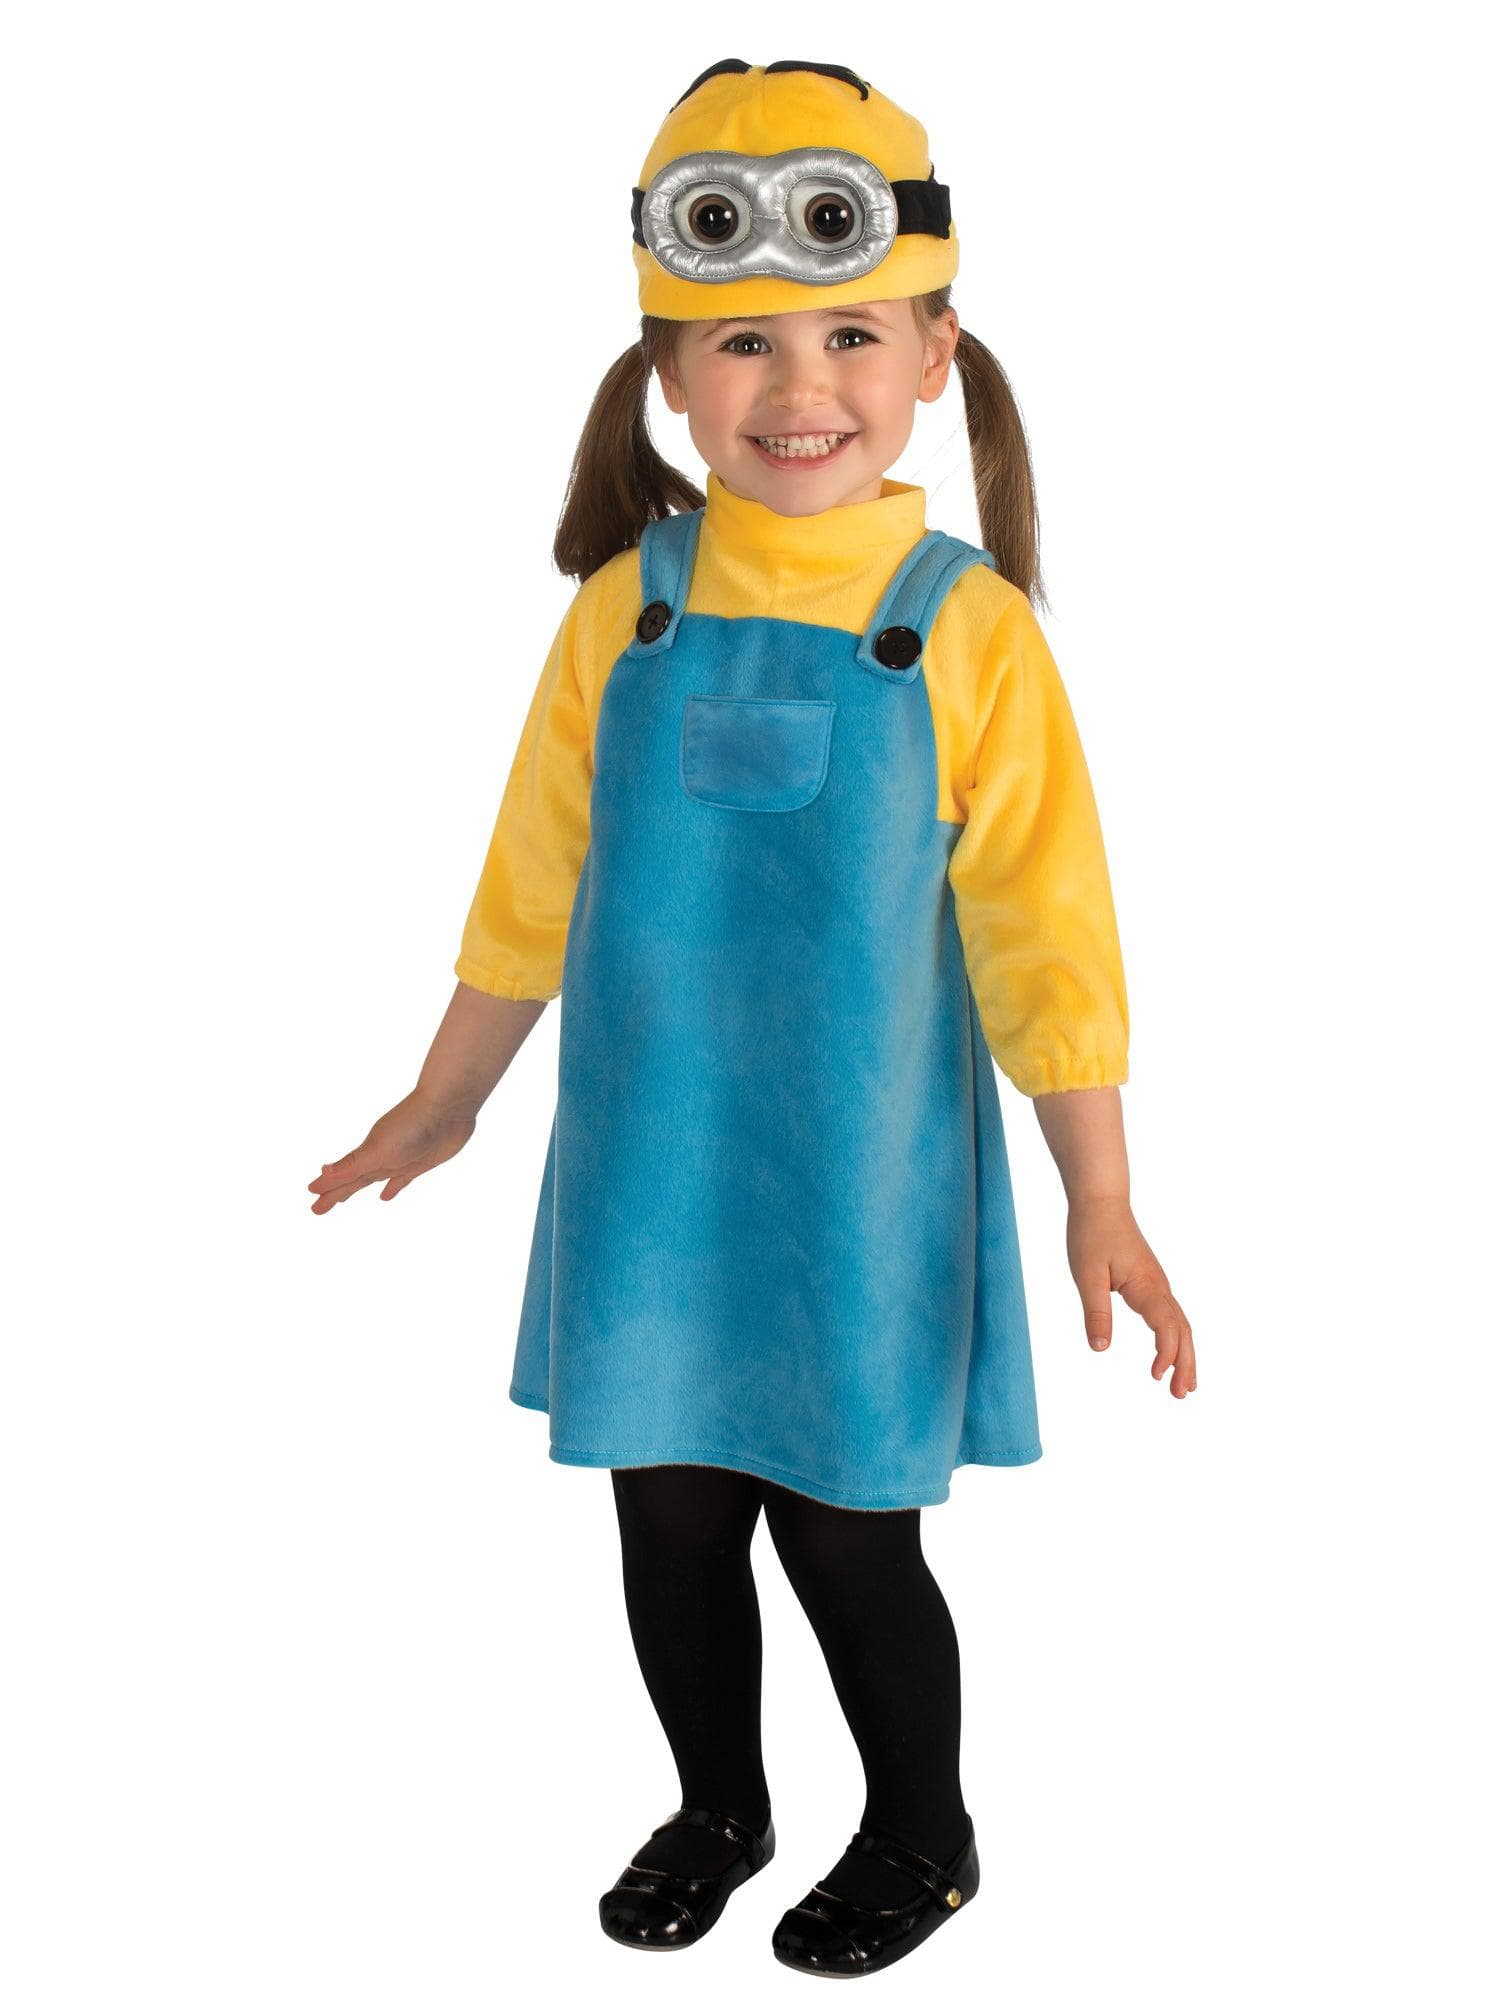 Despicable Me Minion Girl Costume for Babies and Toddlers - costumes.com